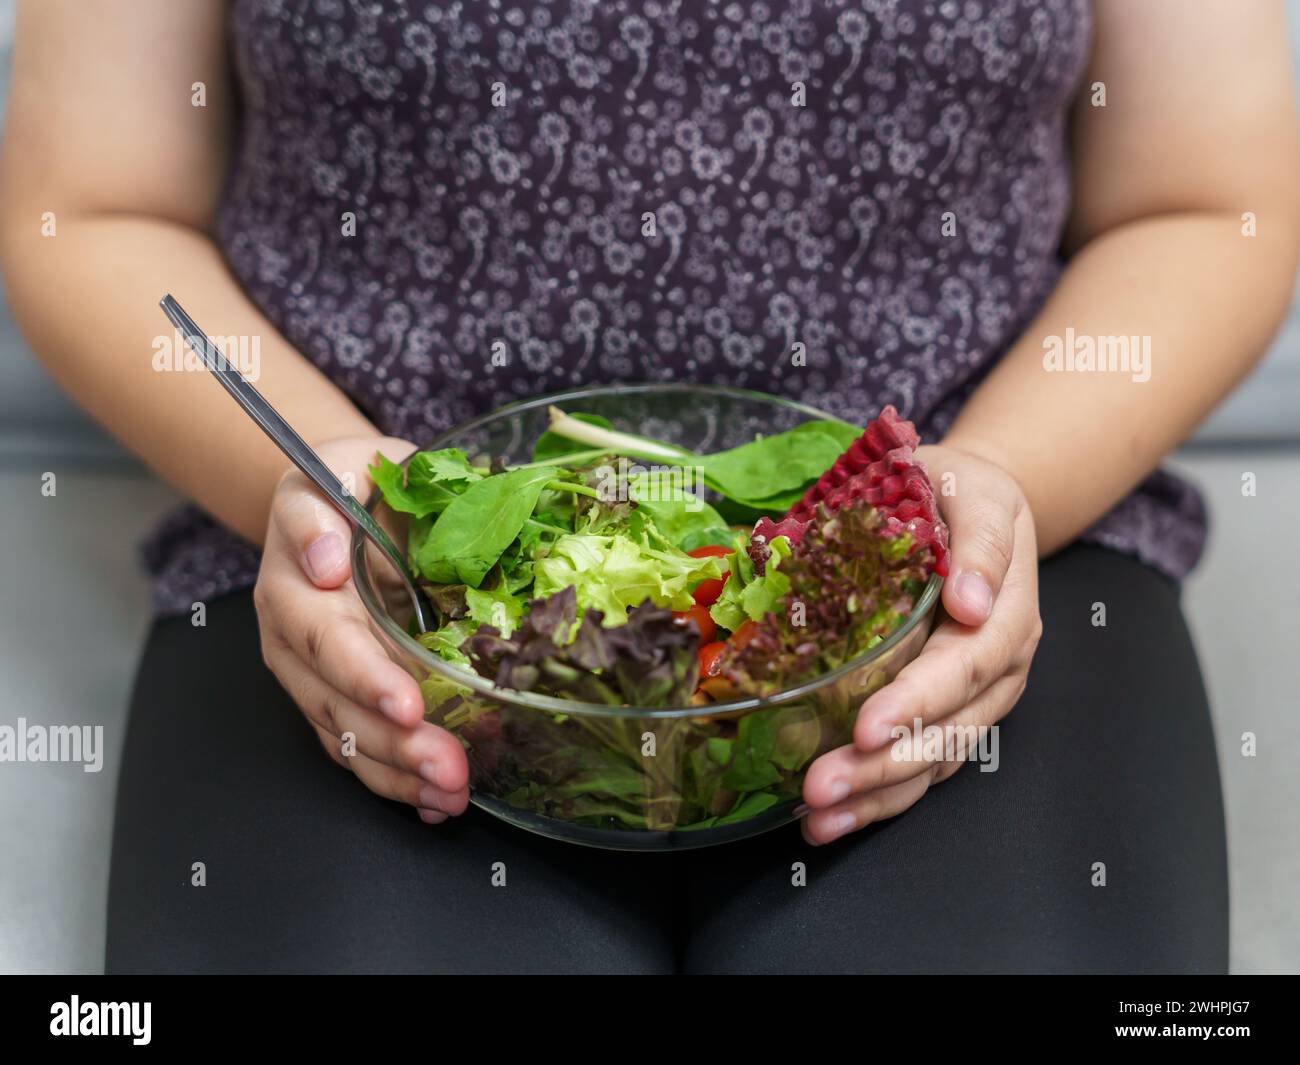 Asian Overweight woman dieting Weight loss eating fresh fresh homemade salad healthy eating concept Obese Woman with weight diet Stock Photo